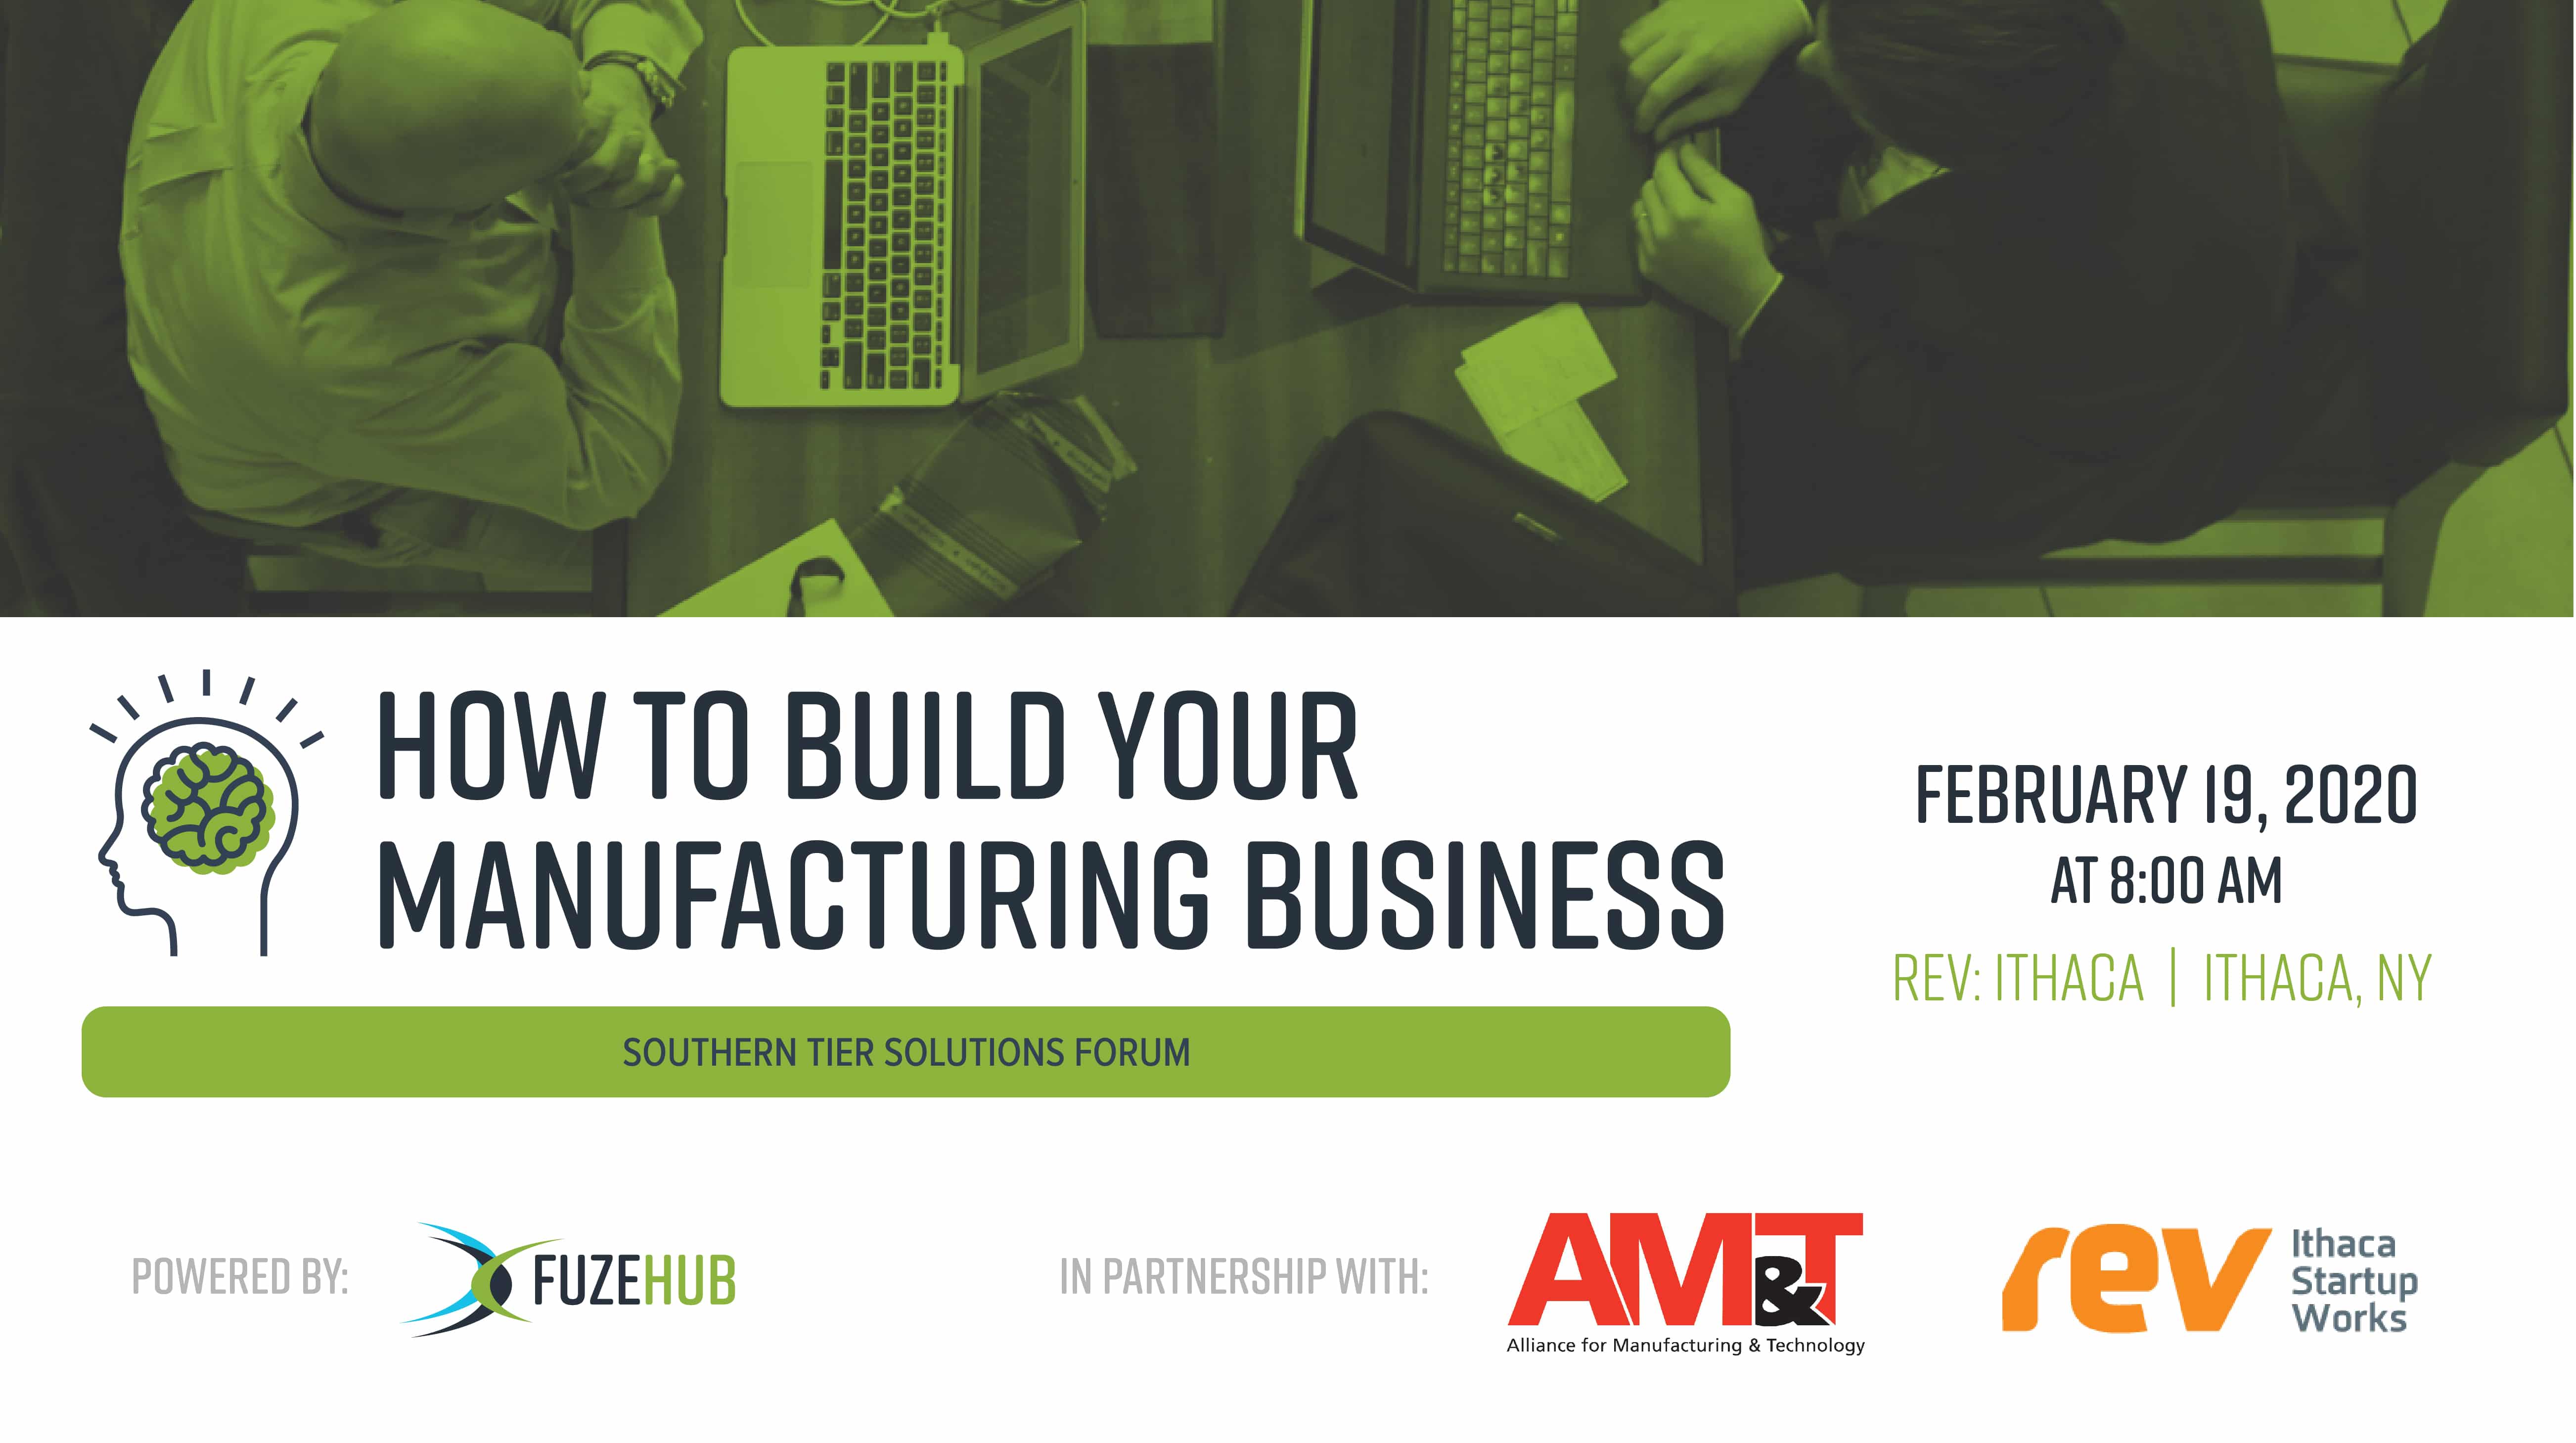 How to Build Your Manufacturing Business: February 19 (8am - 12pm) at Rev: Ithaca Startup Works.